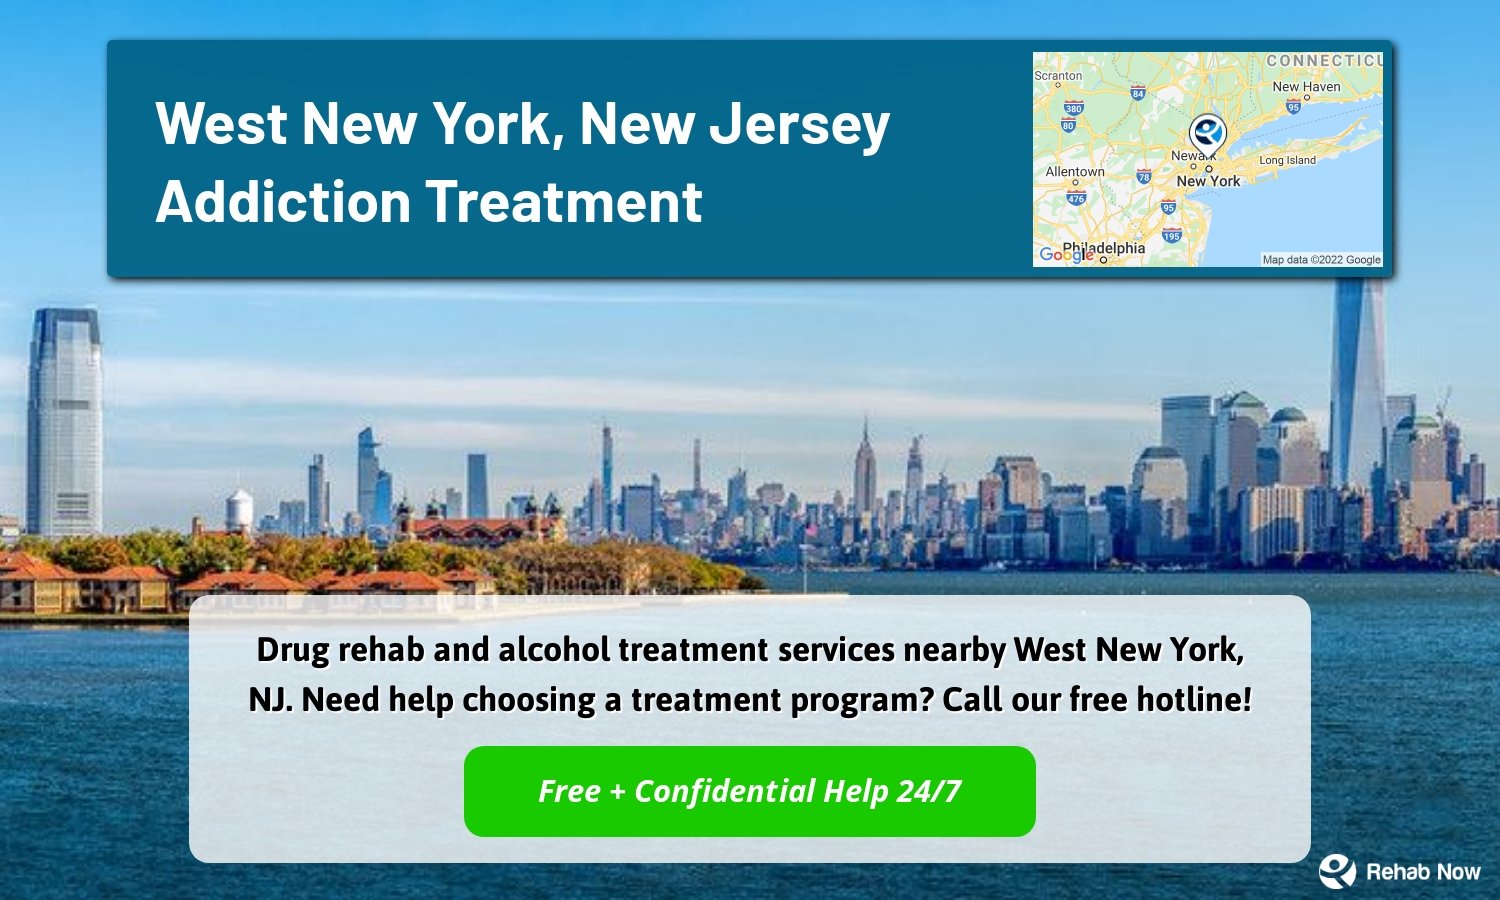 Drug rehab and alcohol treatment services nearby West New York, NJ. Need help choosing a treatment program? Call our free hotline!